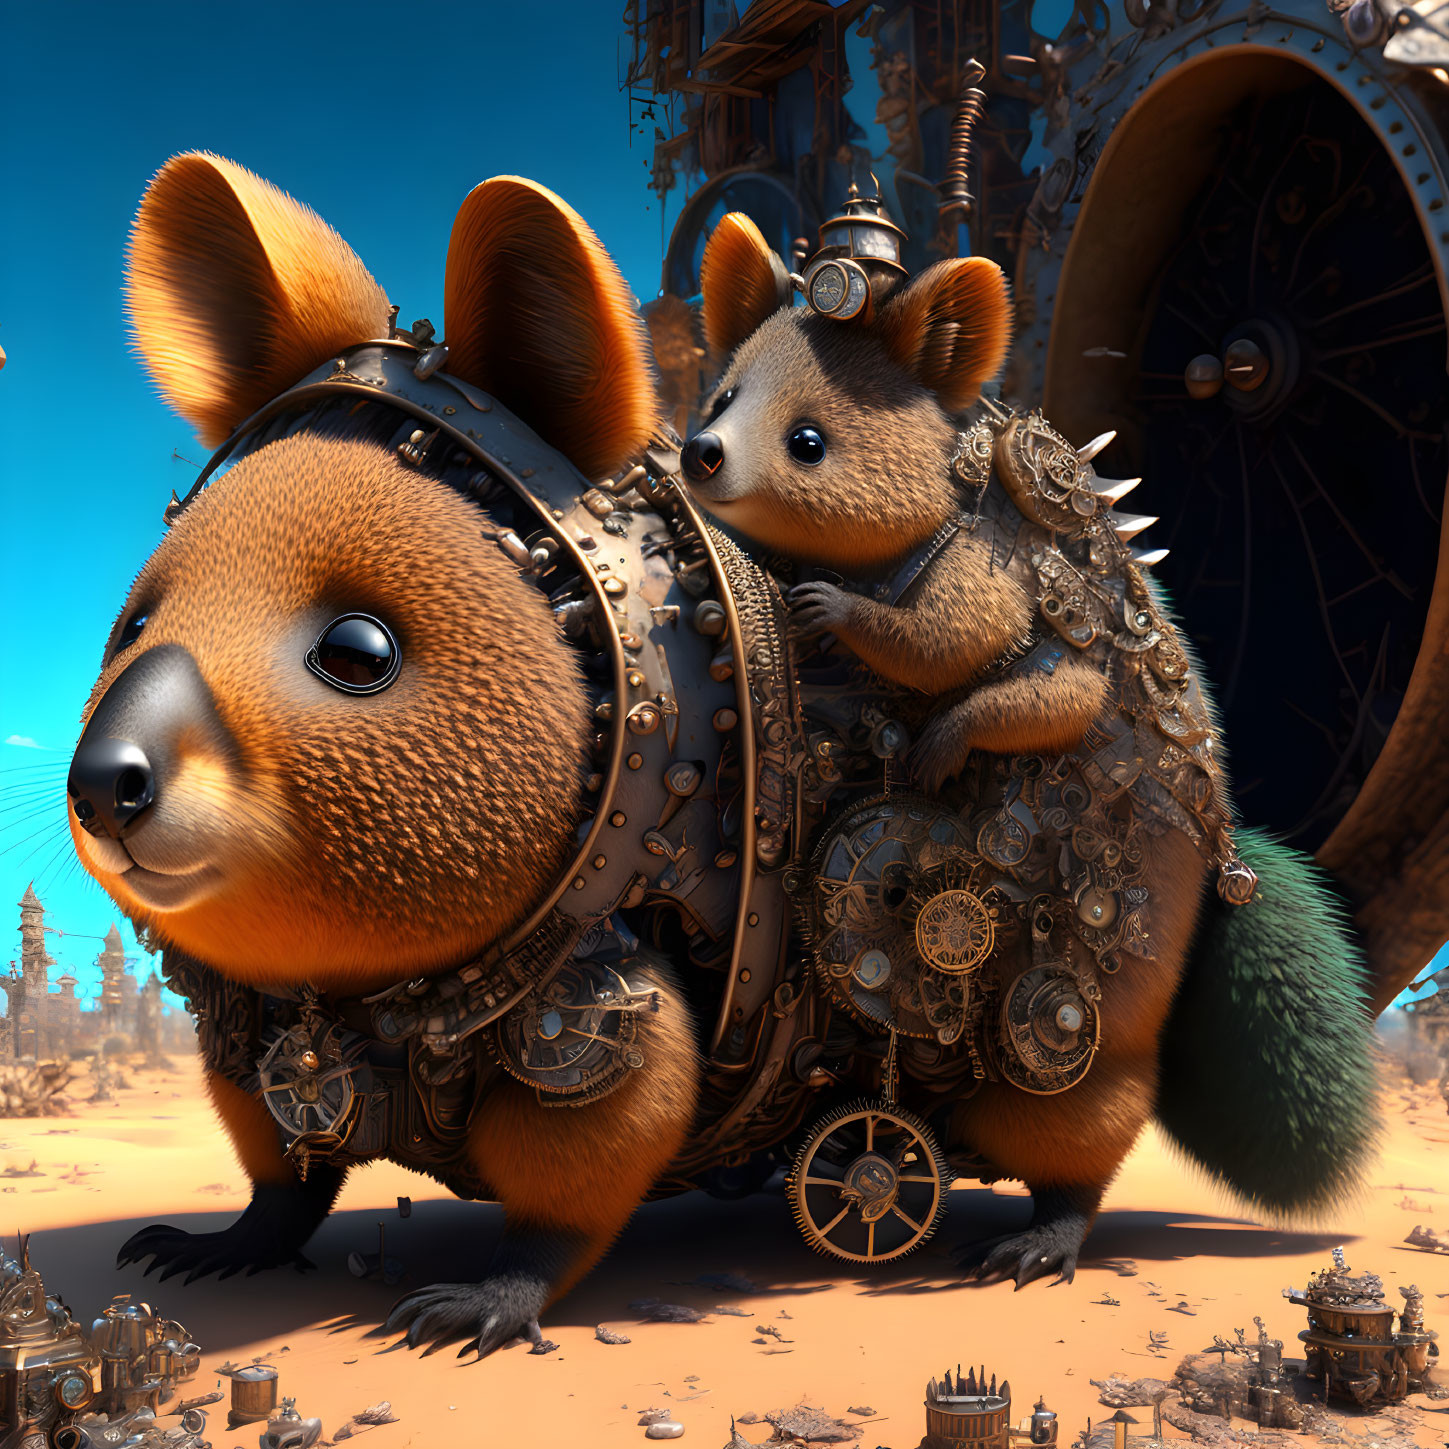 Mechanical squirrel with intricate gears and futuristic backdrop.